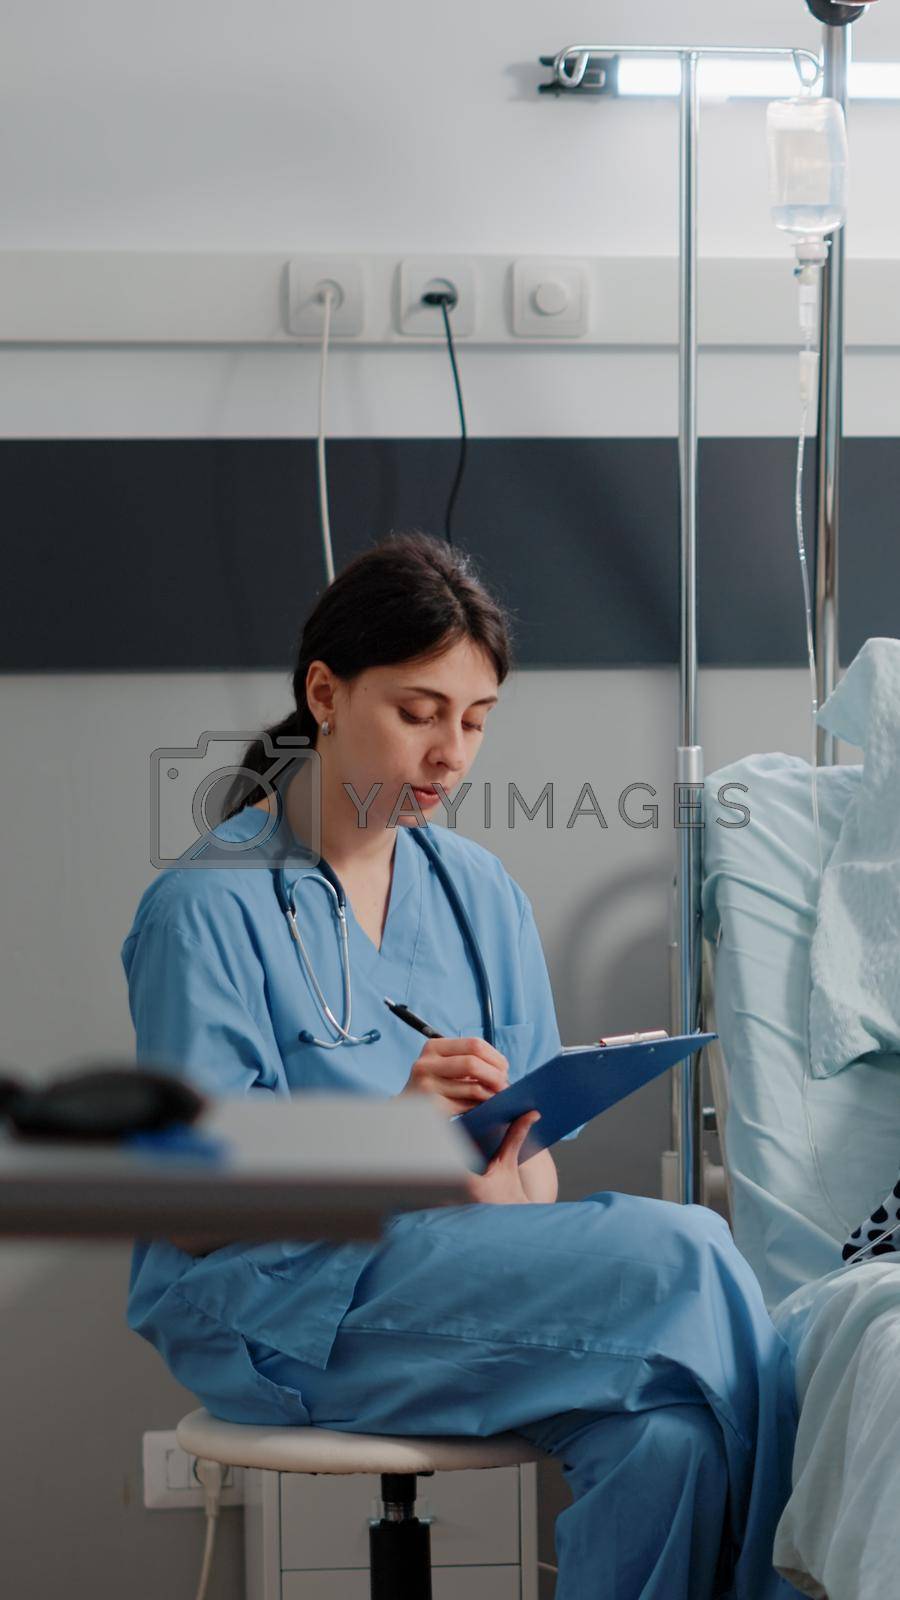 Medical assistant doing checkup visit with ill patient for healthcare and recovery. Nurse talking to aged woman with IV drip bag and nasal oxygen tube while taking notes for diagnosis